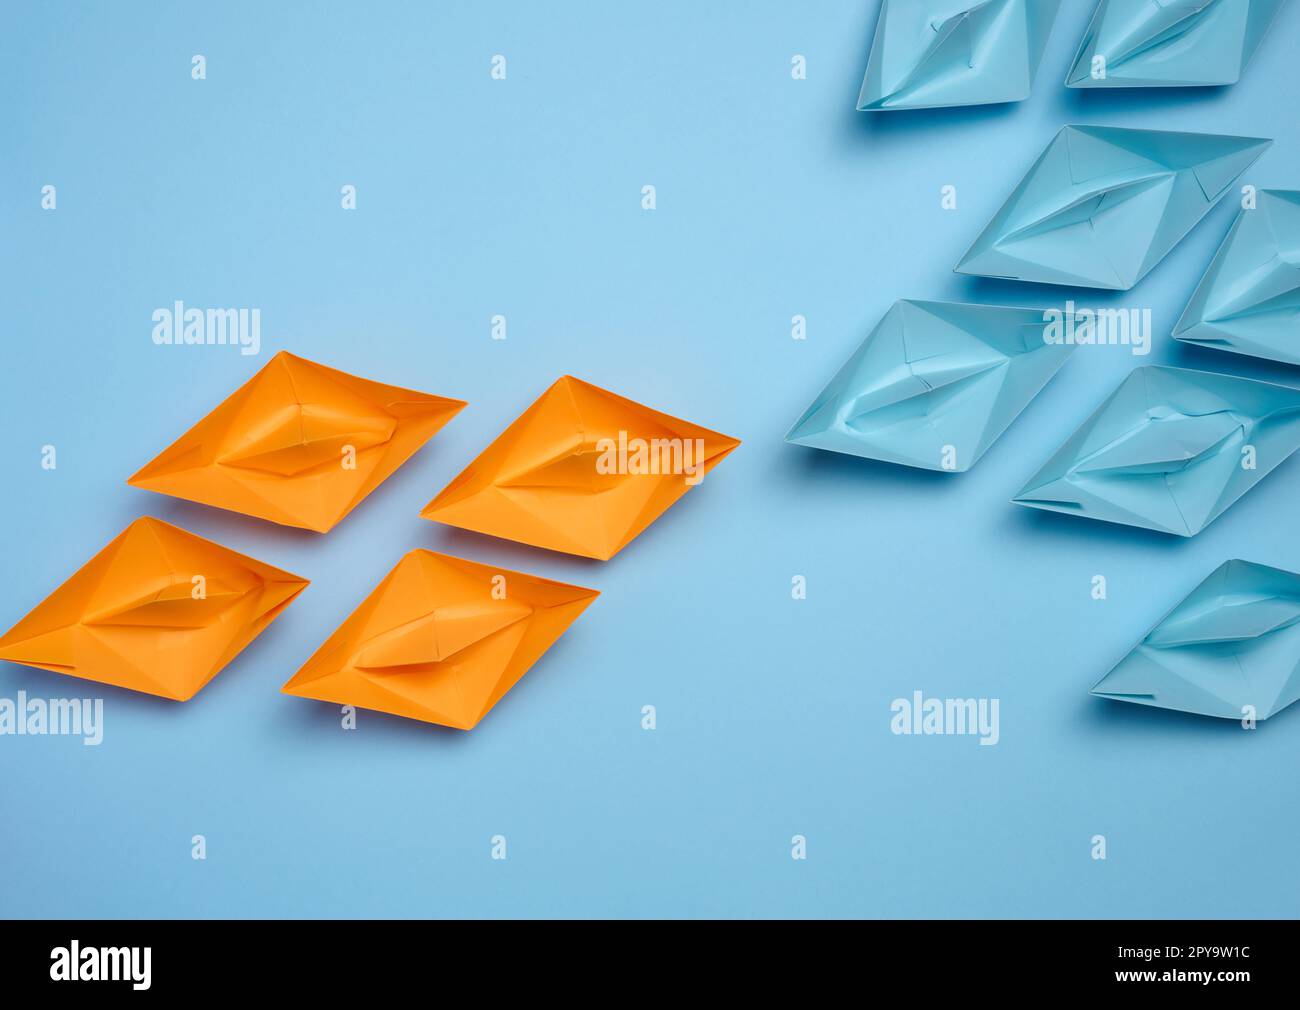 Two groups of paper boats facing each other, a concept of confrontation Stock Photo